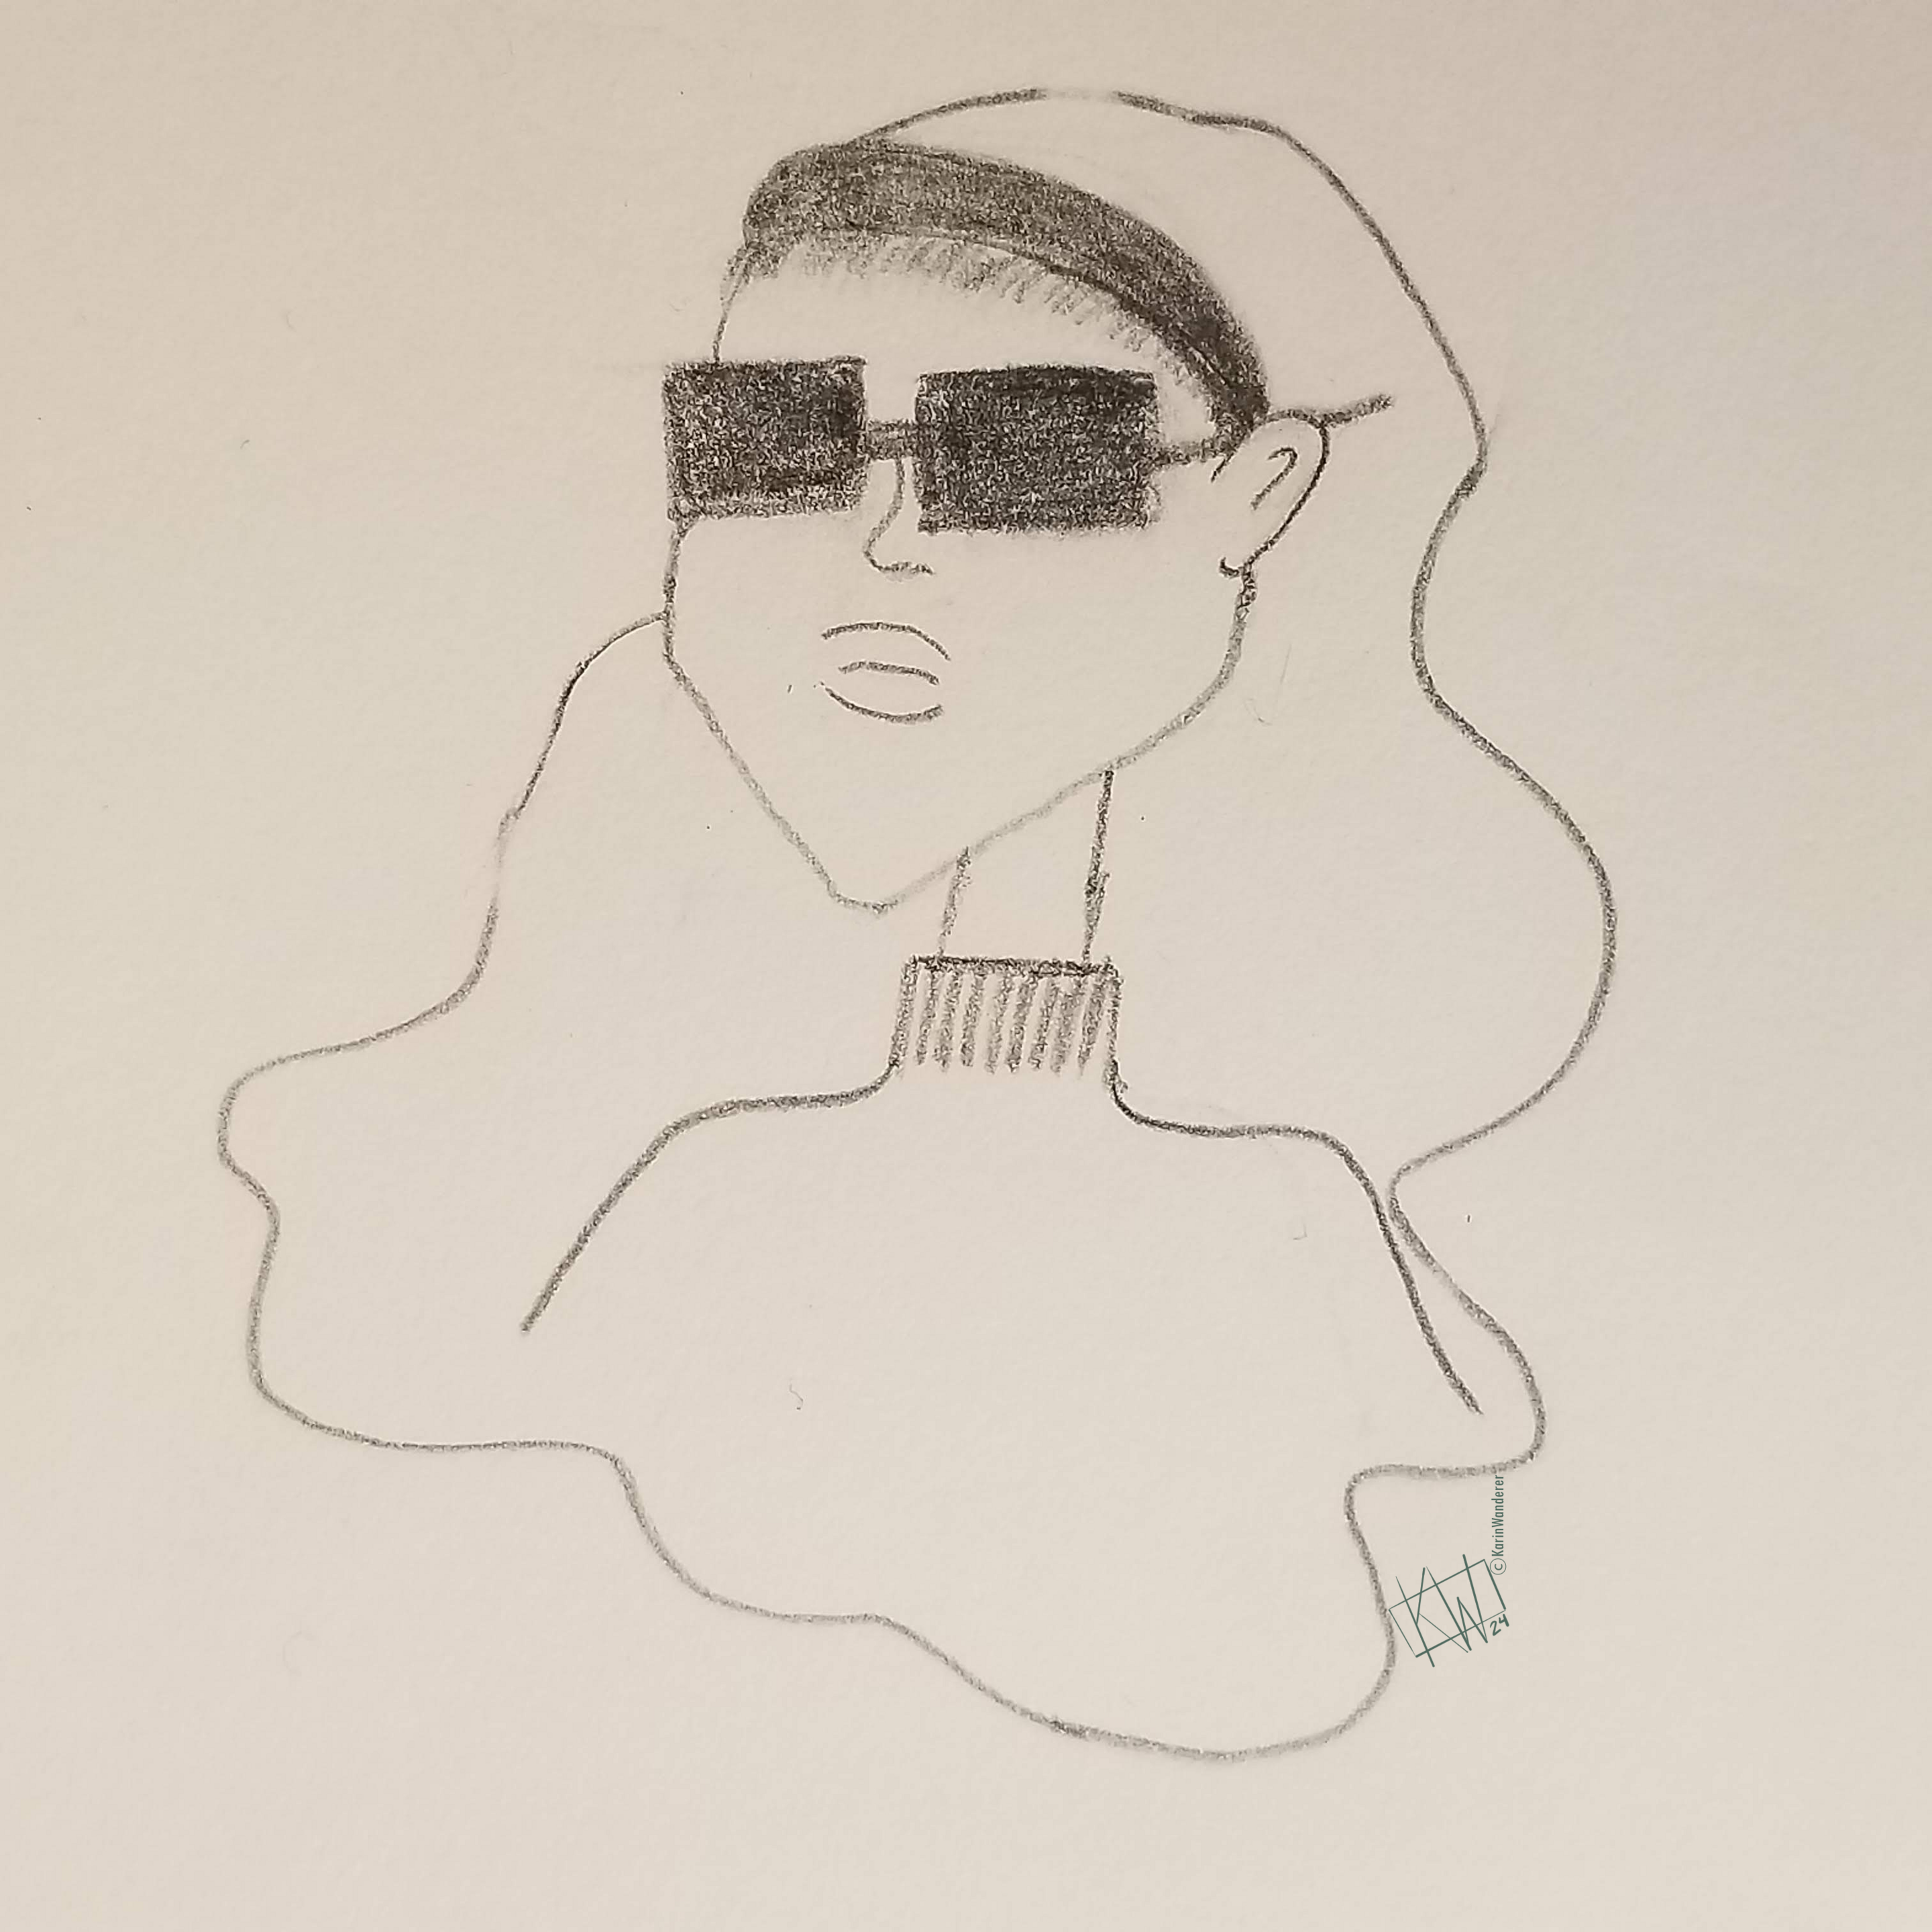 Pencil sketch of woman wearing sunglasses & a head band to hold back her long hair.